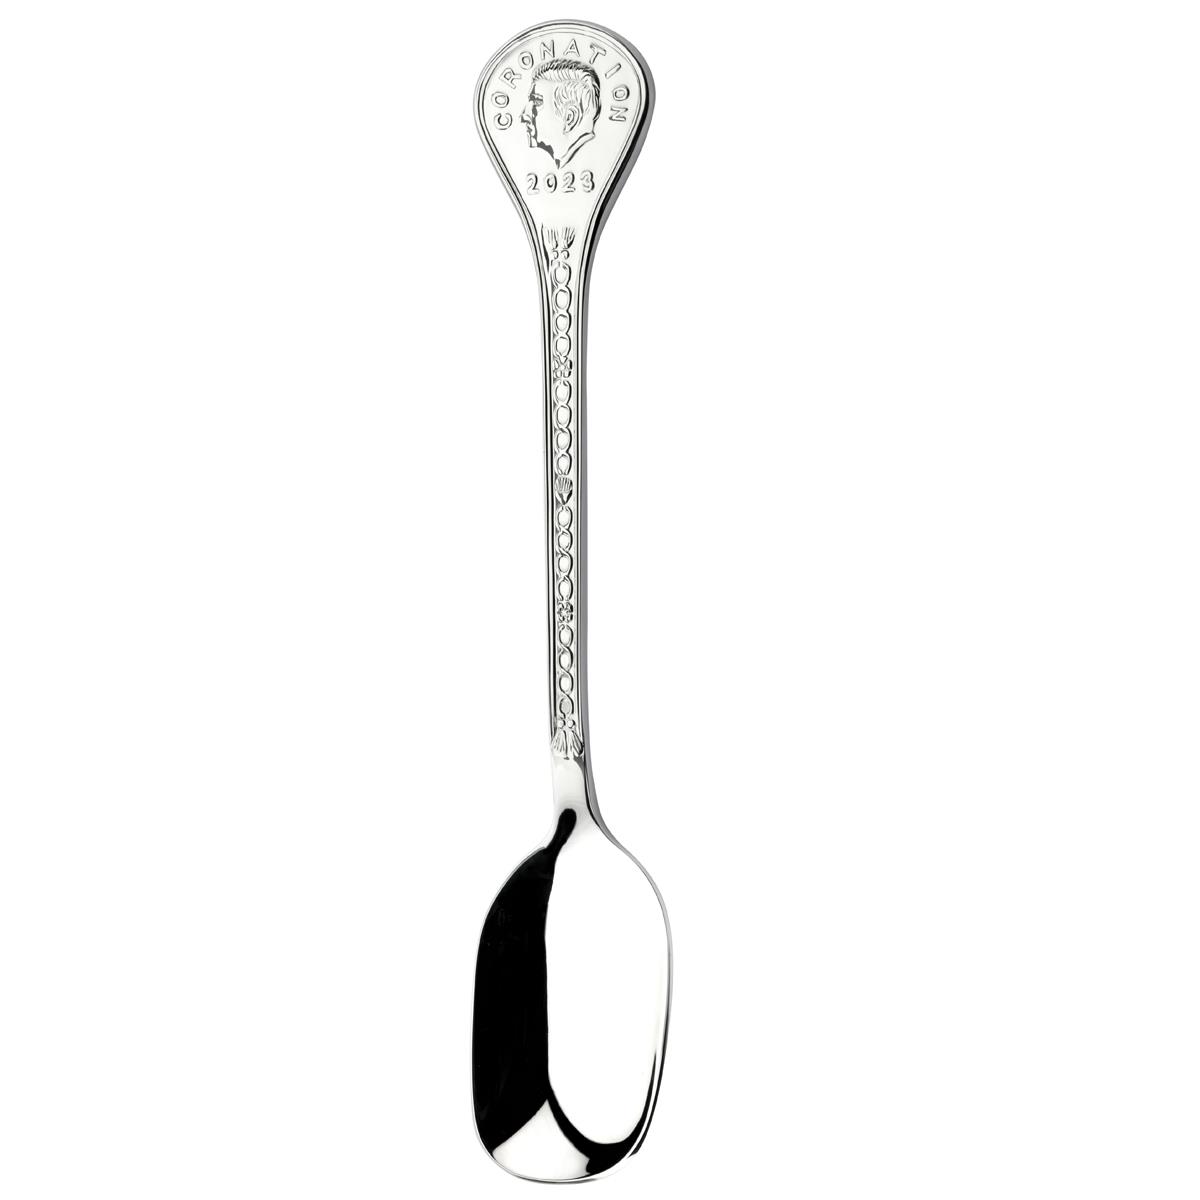 What is the packaging like for the 2023 coronation spoon Arthur Price King Charles III?